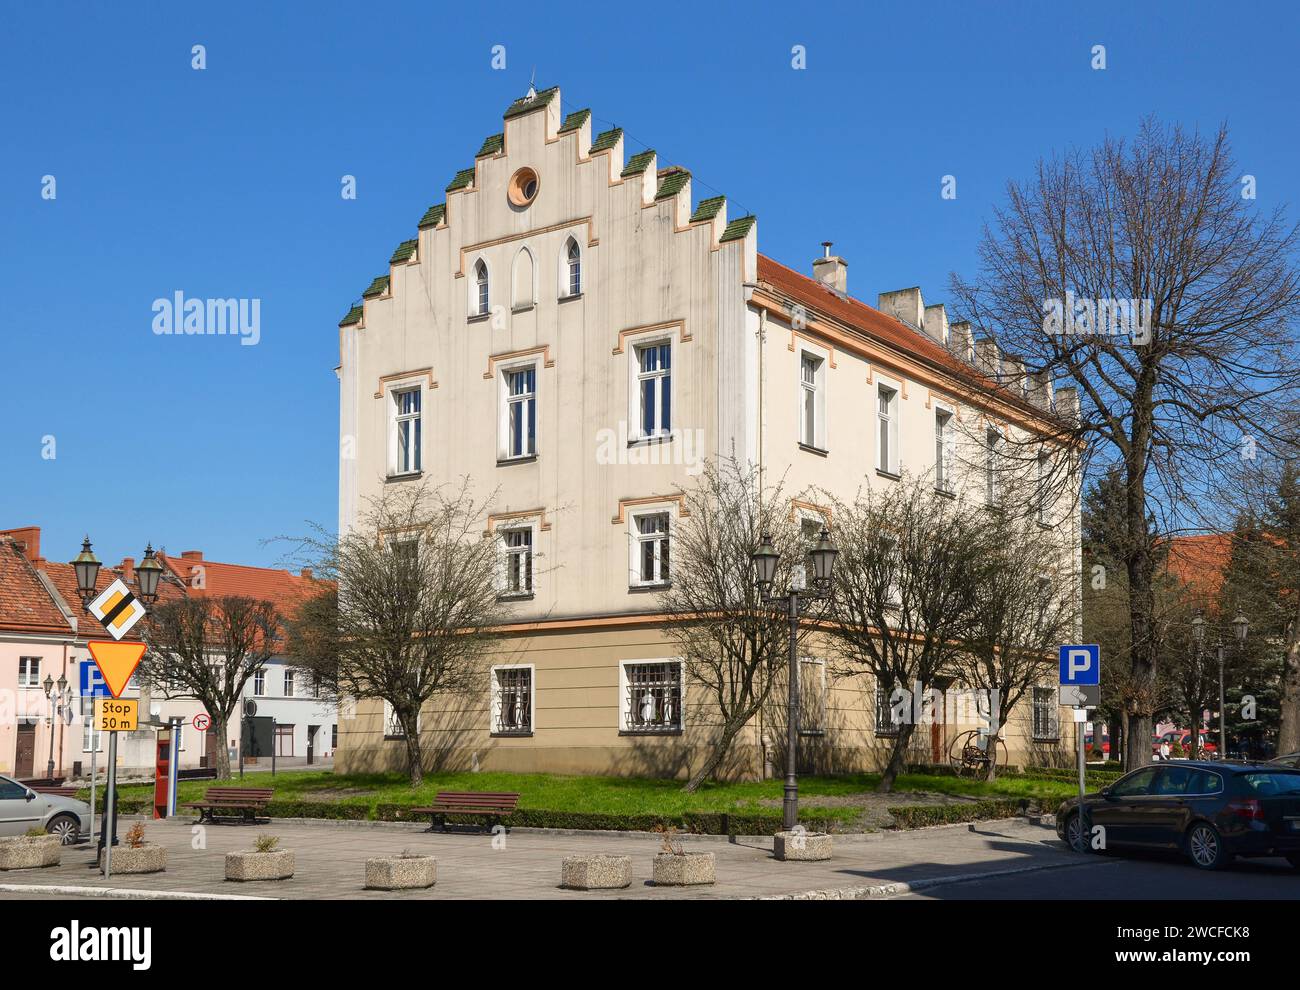 The Old Town Square with the Town Hall in Pyskowice, Silesia, Poland. Stock Photo